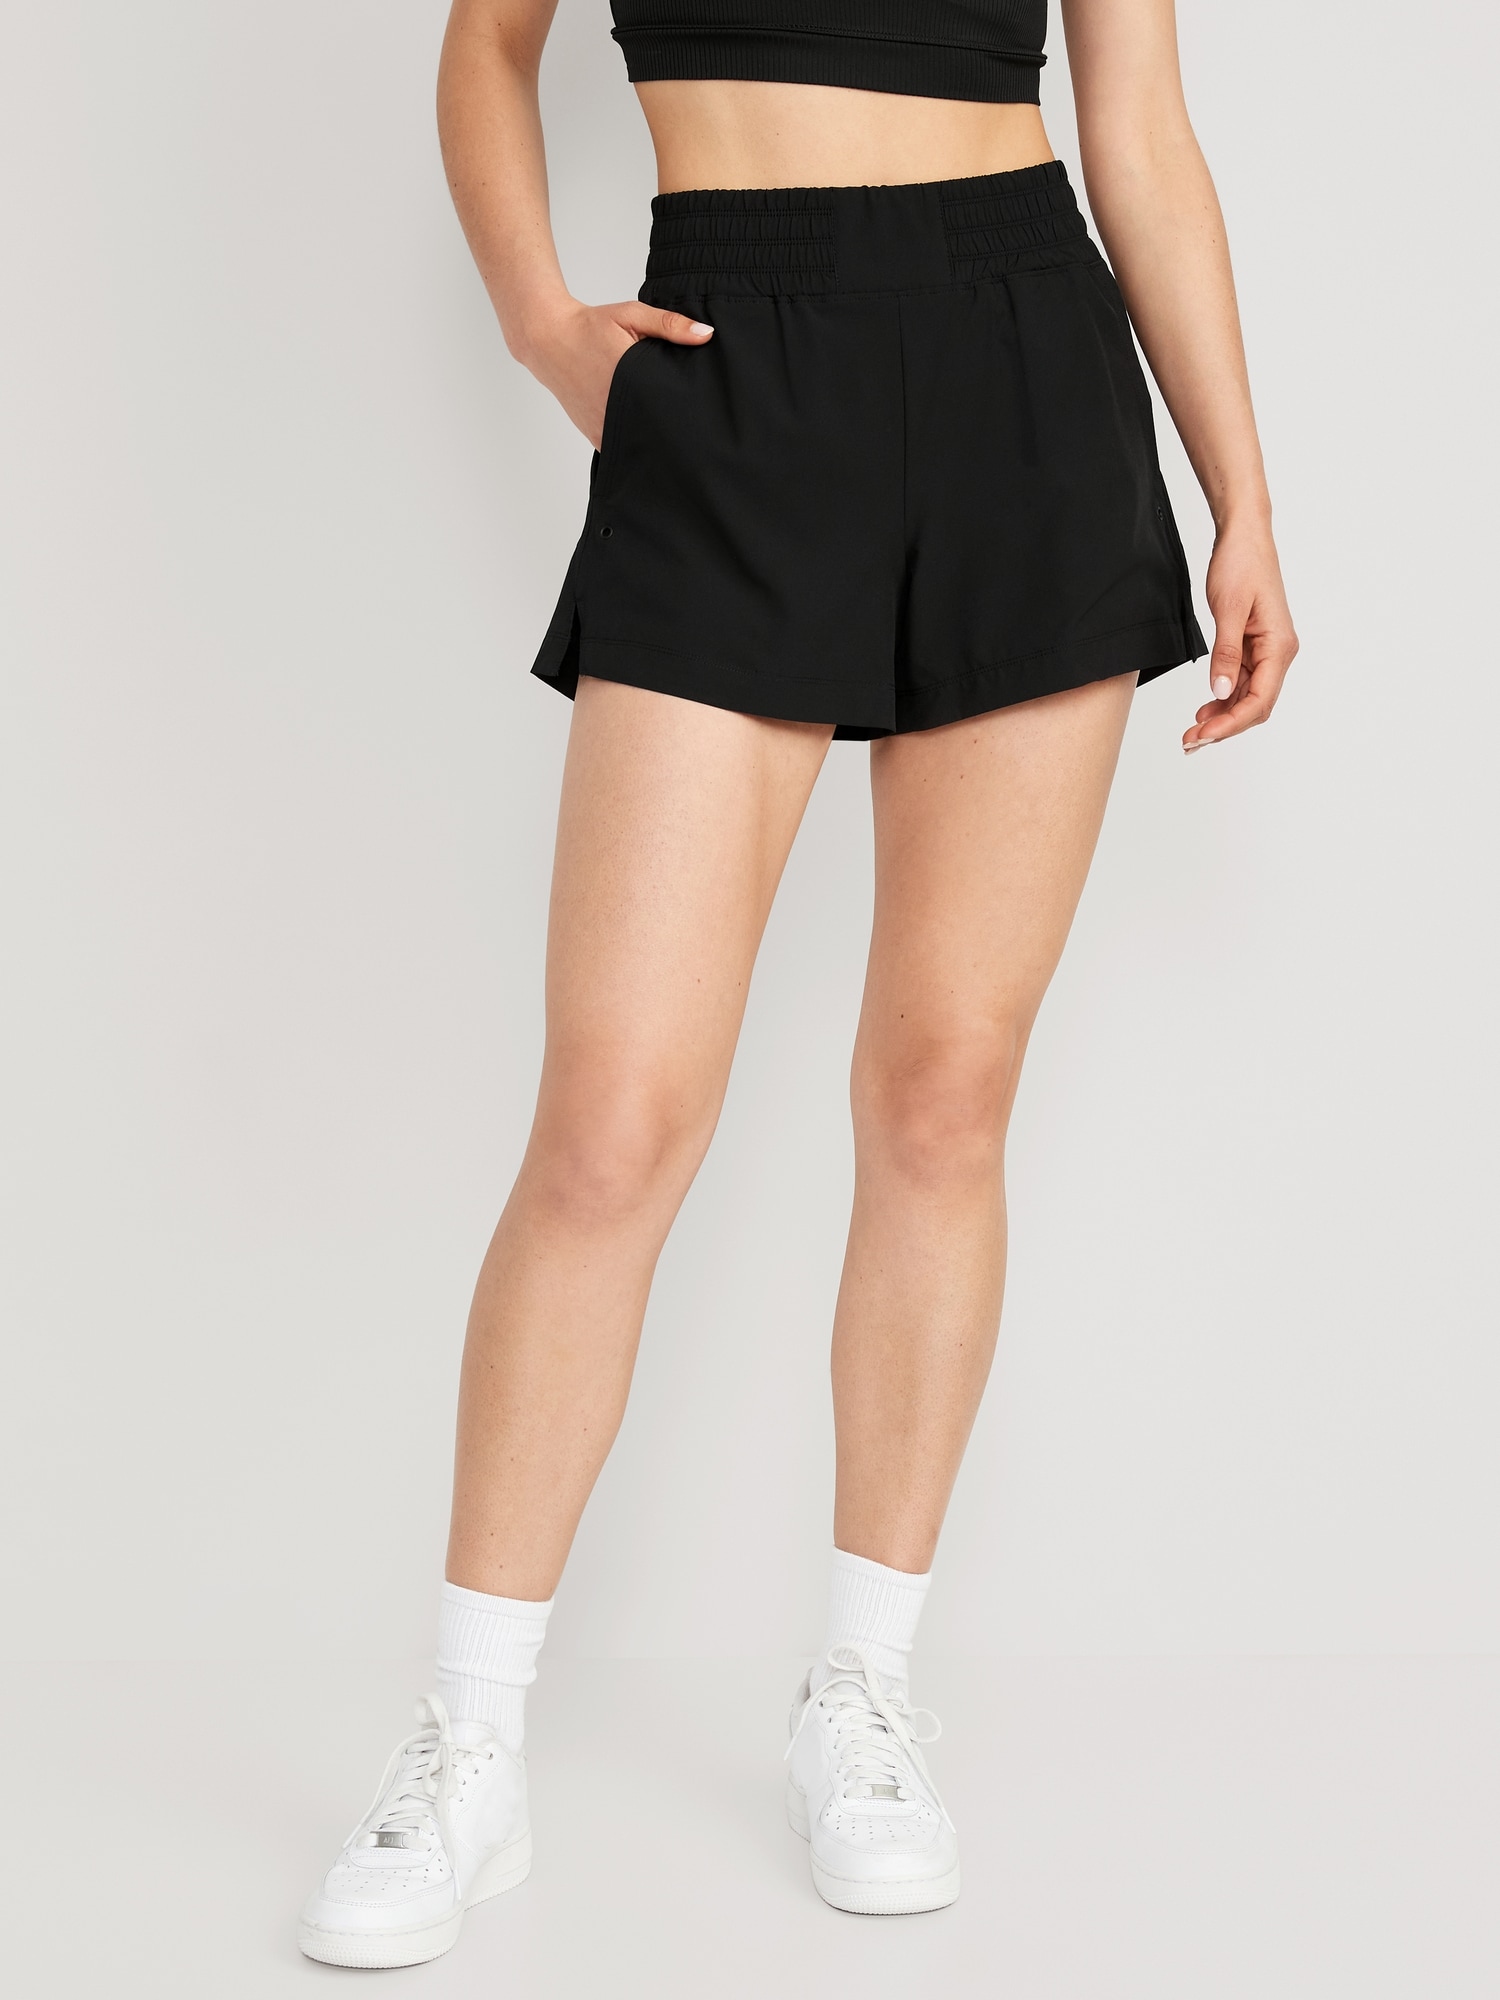 Old Navy - High-Waisted StretchTech Pull-On Shorts for Women - 4-inch  inseam black